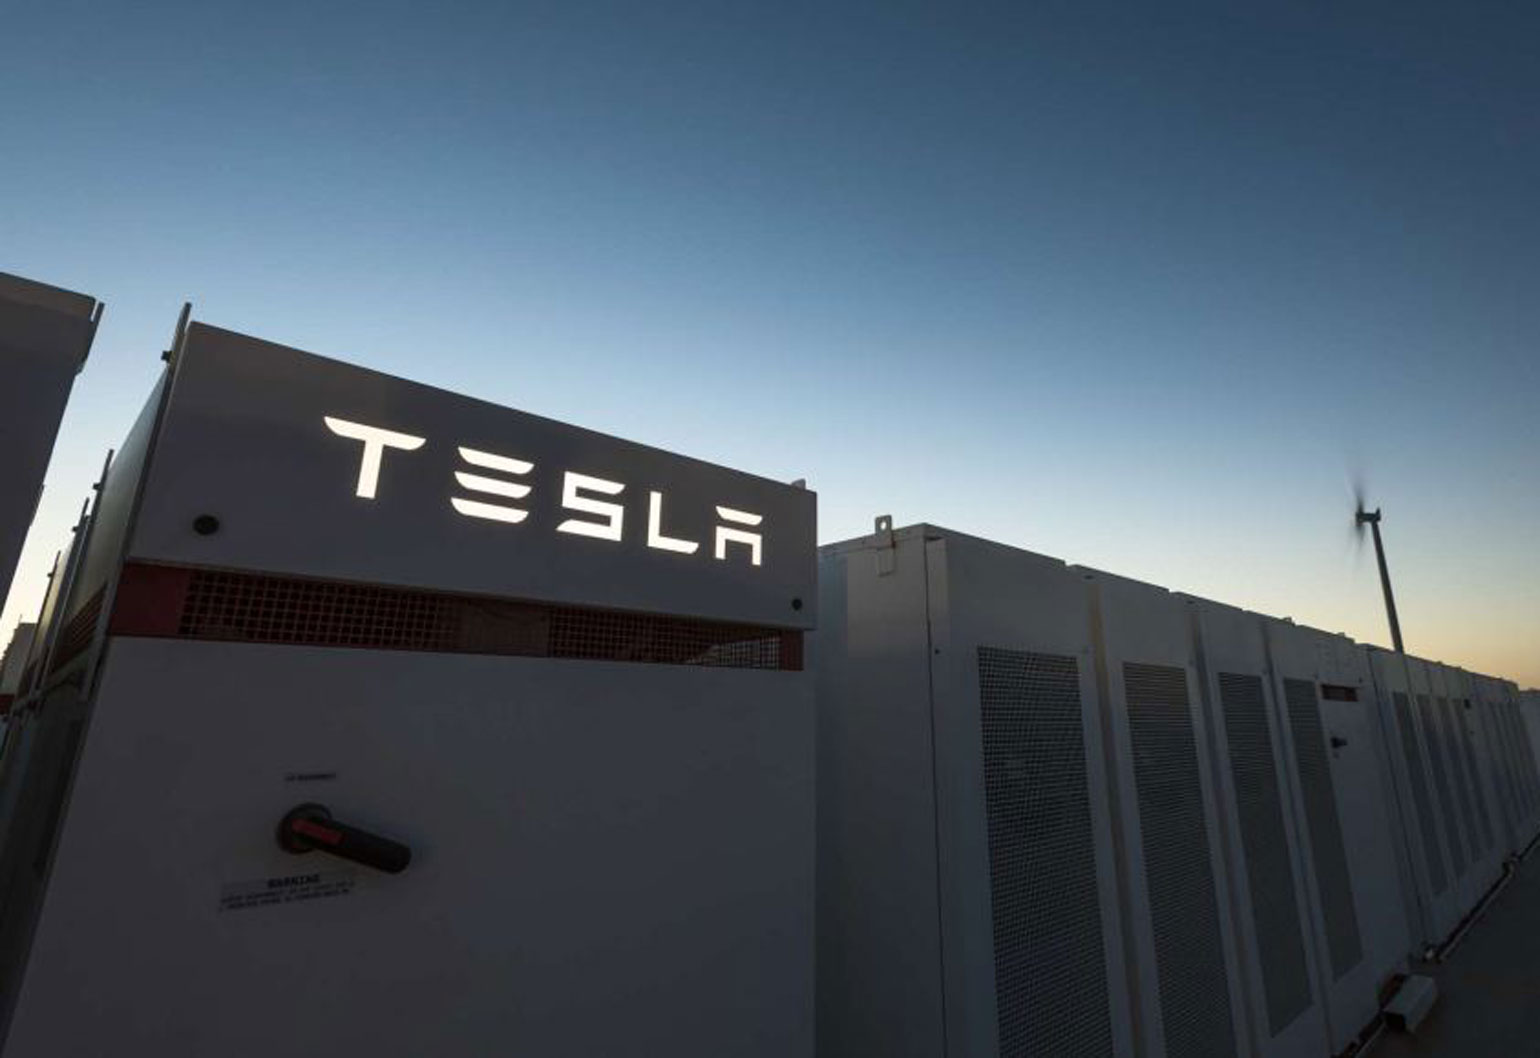 largest battery installed in South Australia by Tesla